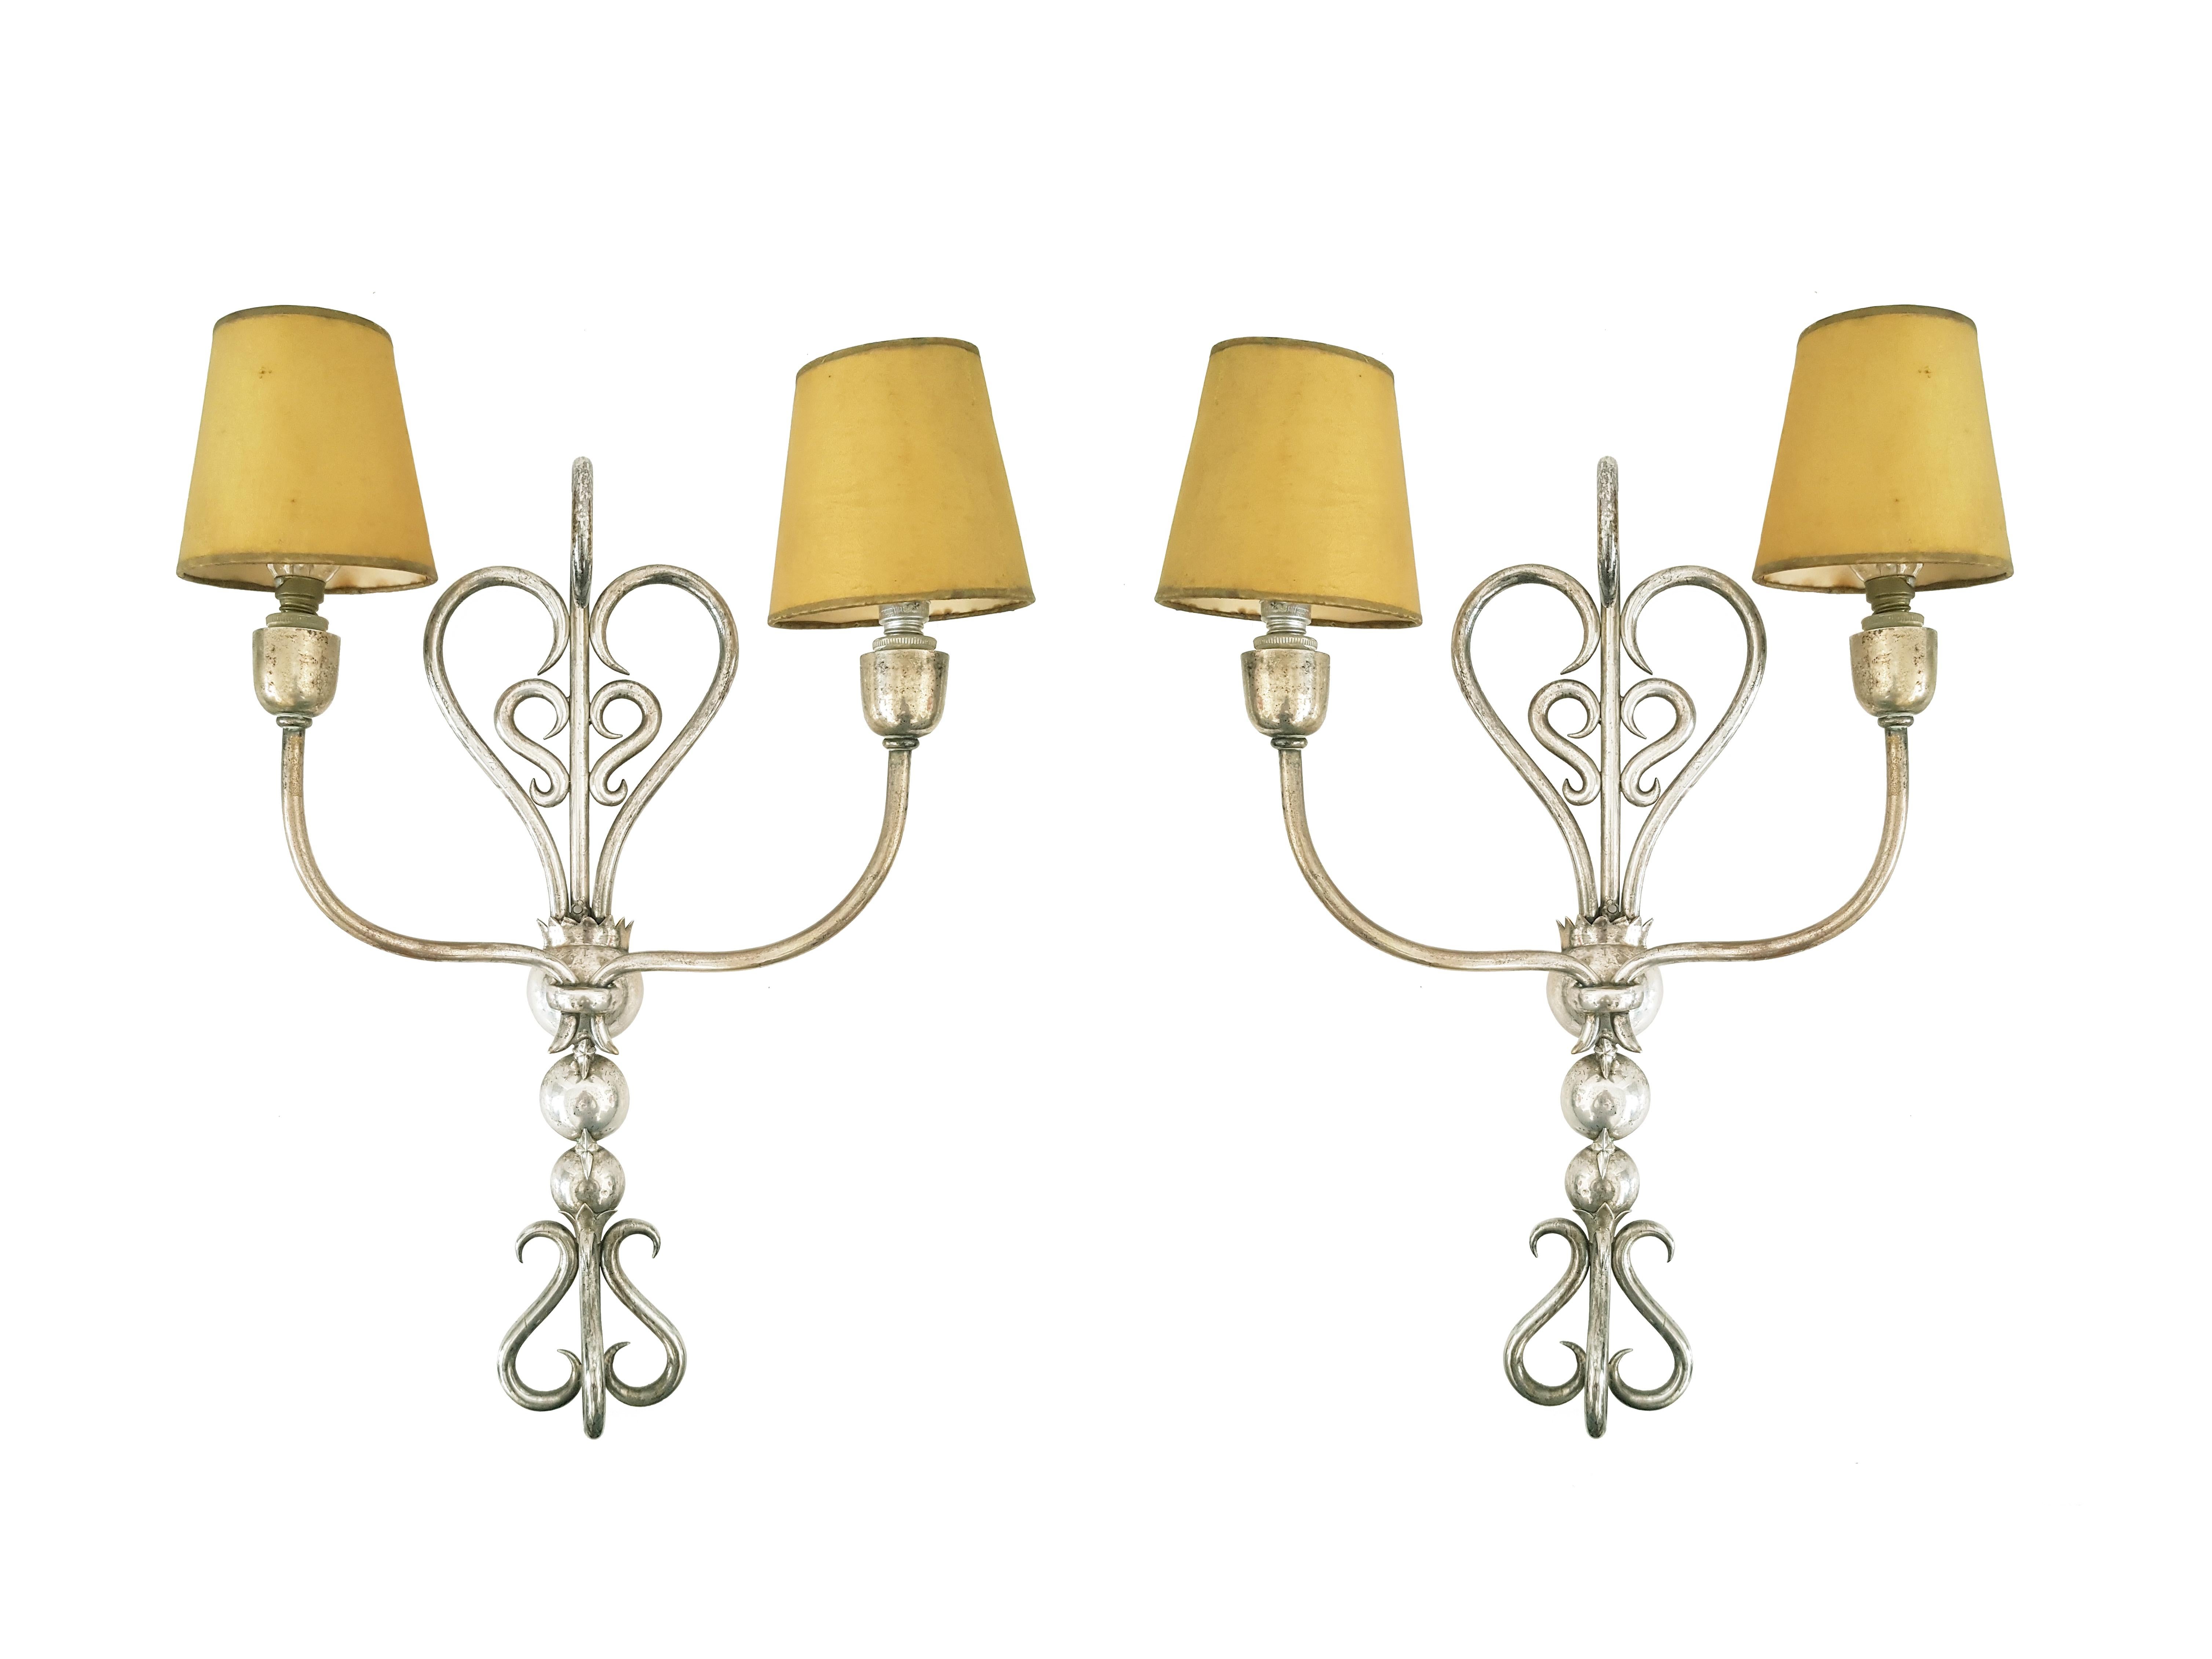 This elegant pair of wall lamp was hand made in Italy around 1930s. The structure is made with a brass rod folded and welded to form a sinuous and elegant decorative motif of volutes.
Each lamp is equipped with 2 small lamp holders (E14